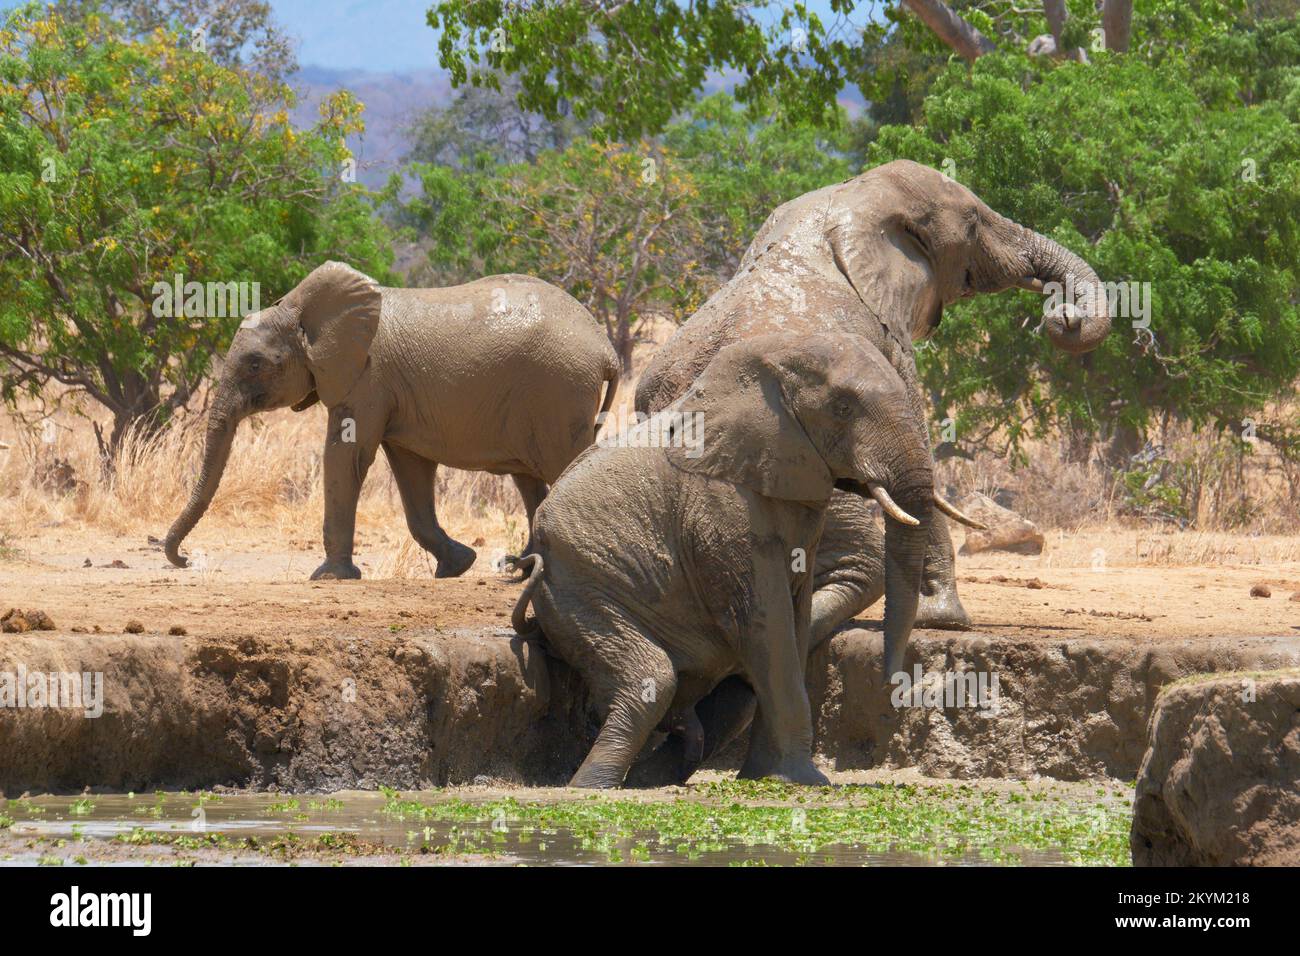 An African Bush Elephants rubs and scratches themselves on a the mud bank of a watering hole in the midday heat of  Mikumi National park in dry season Stock Photo